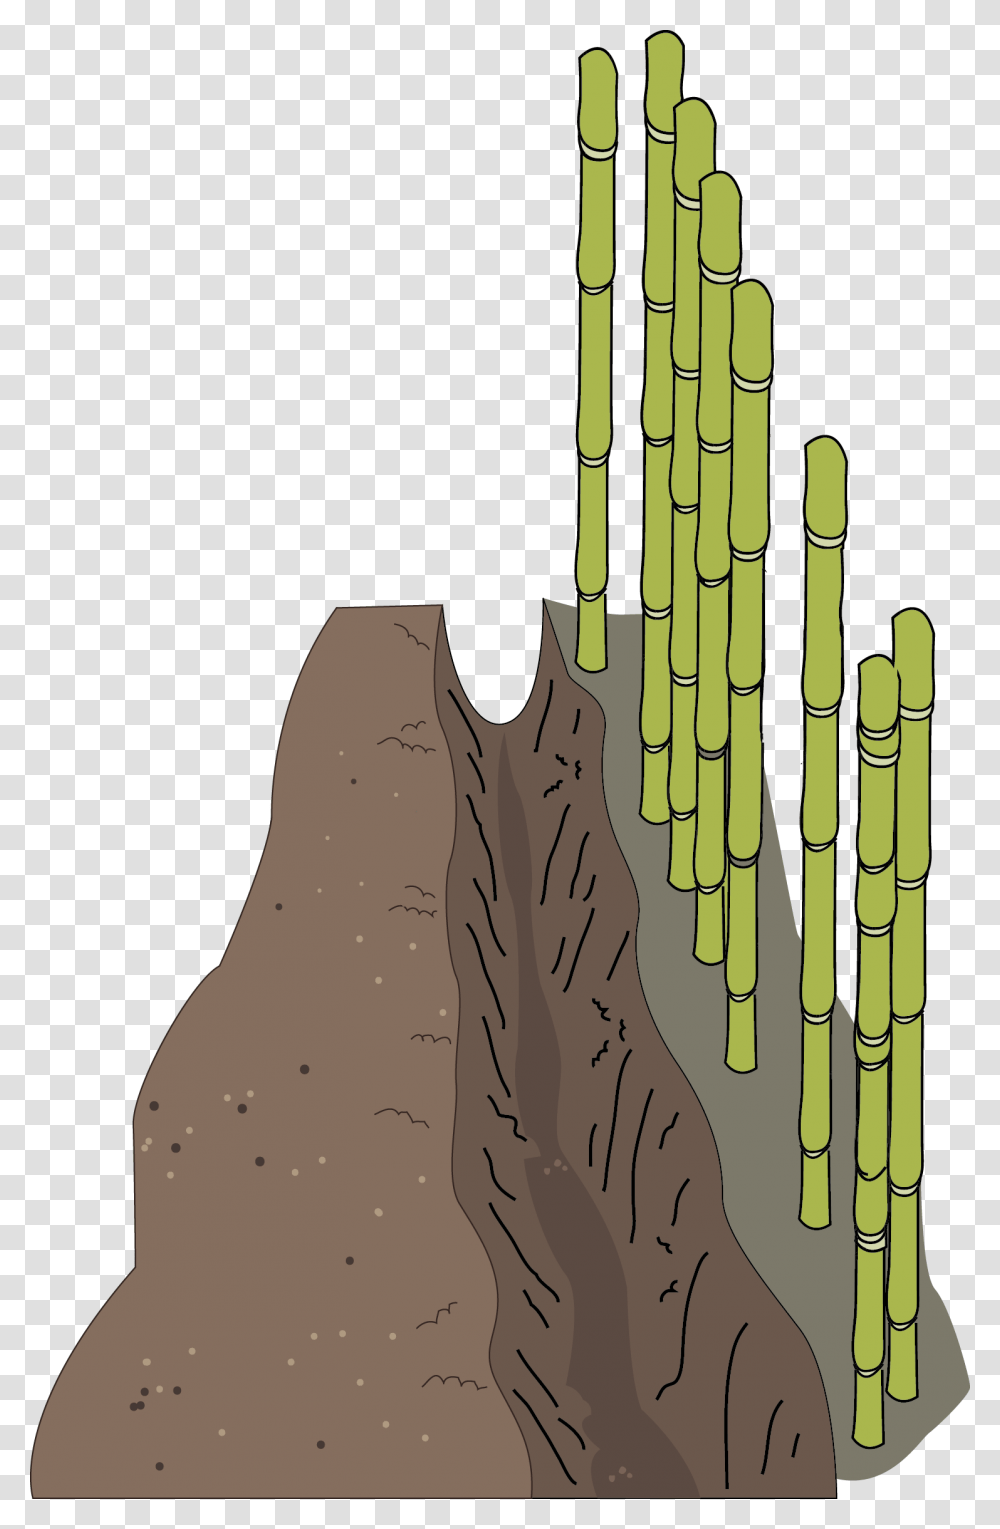 Install Bamboo Shield, Plant, Cactus Transparent Png